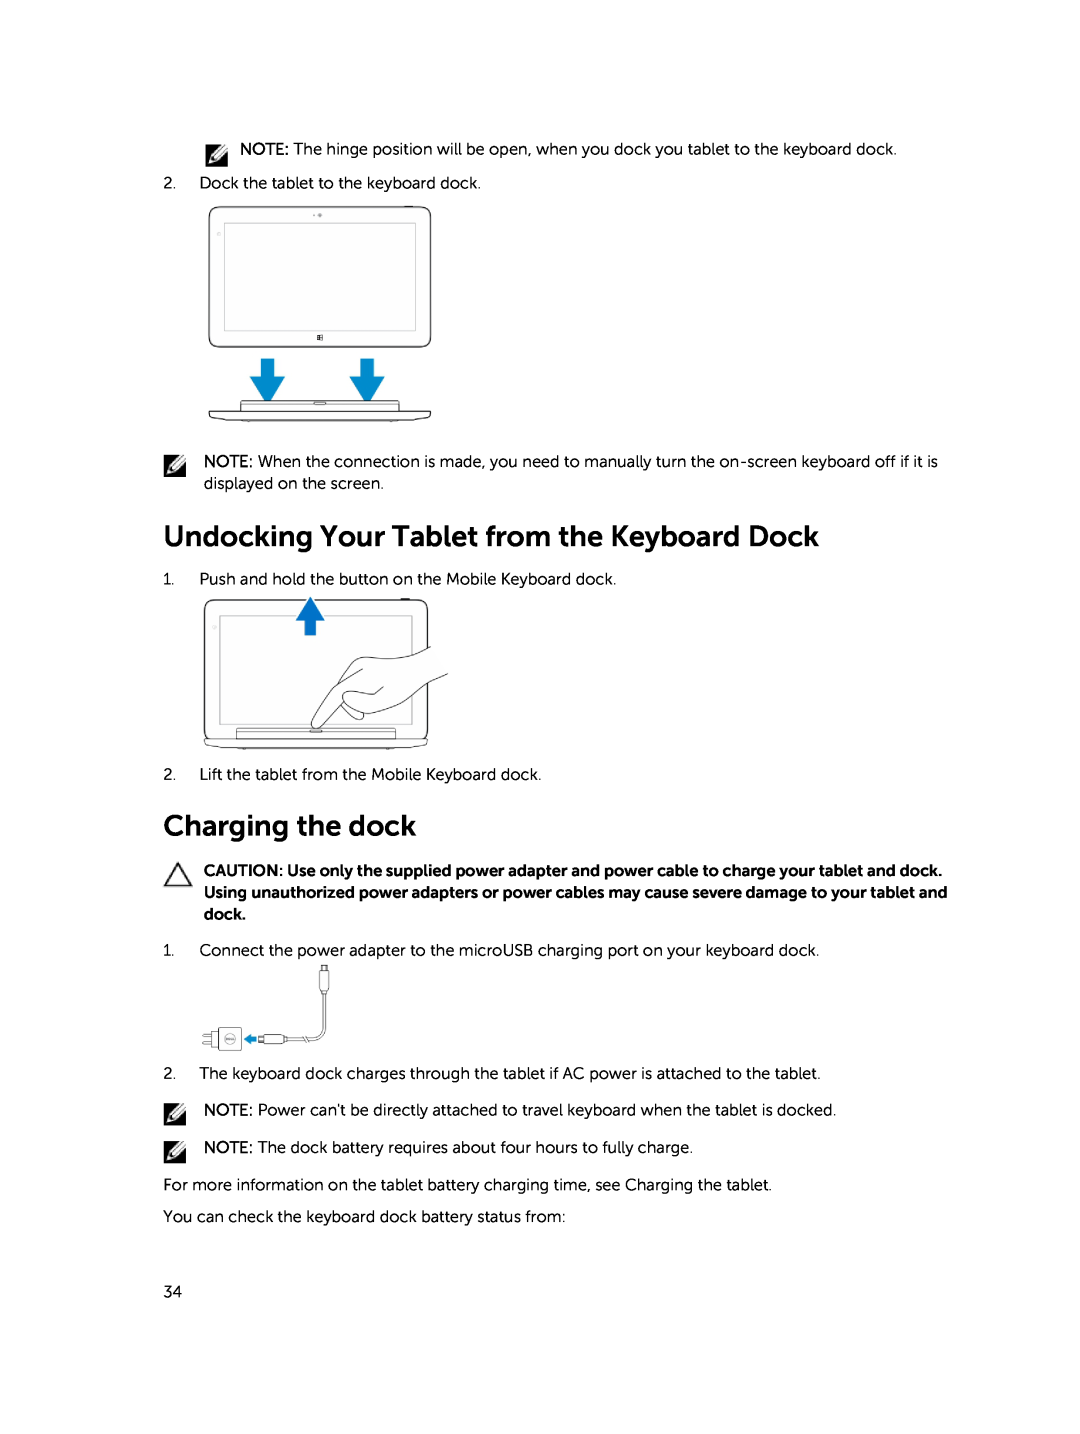 Dell T06G manual Undocking Your Tablet from the Keyboard Dock, Charging the dock 